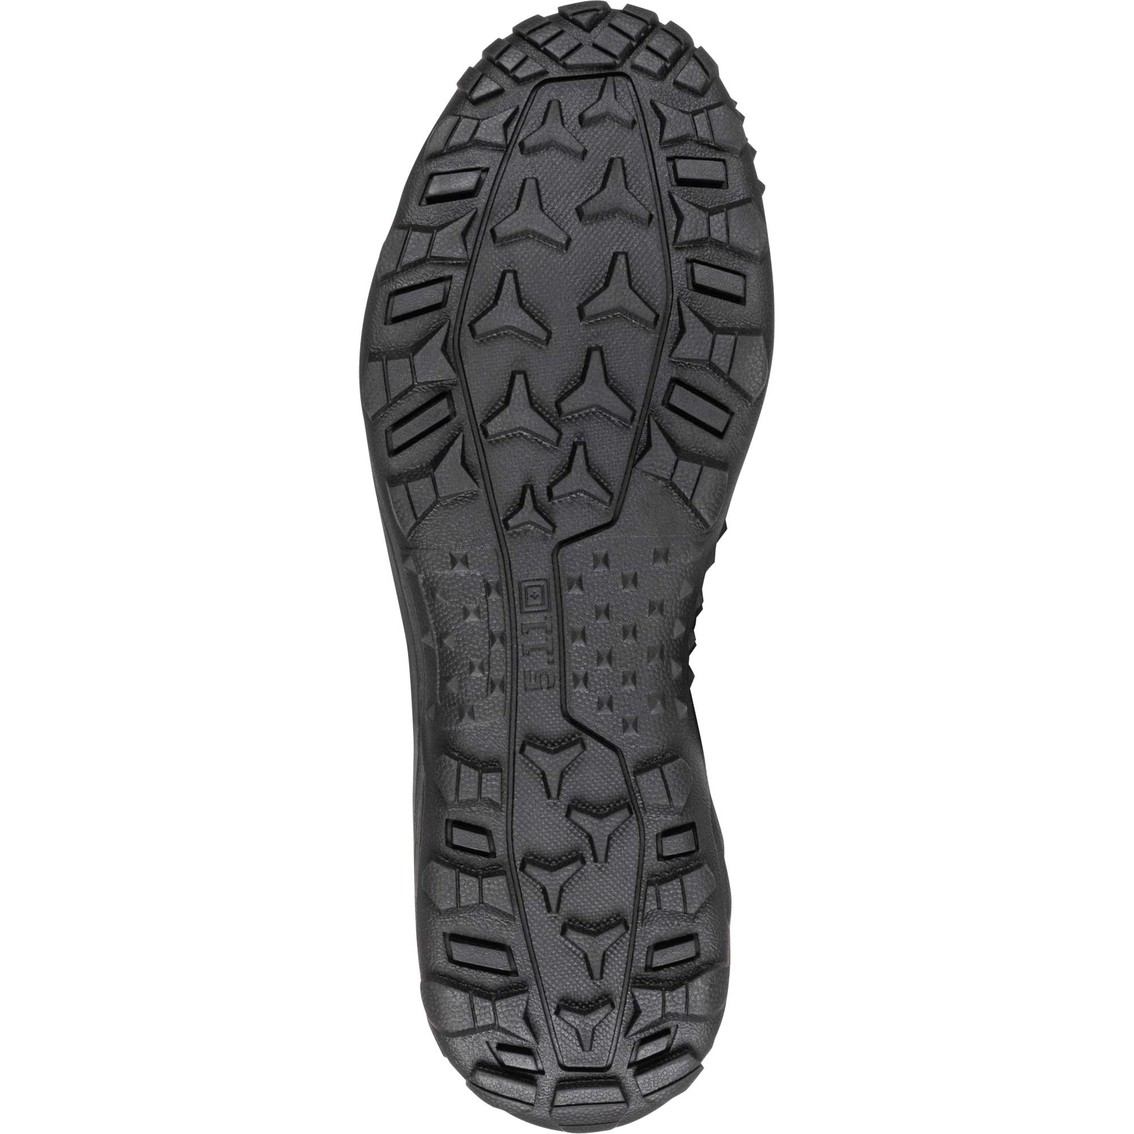 5.11 Men's AT 8 Side Zip Boots - Image 6 of 6